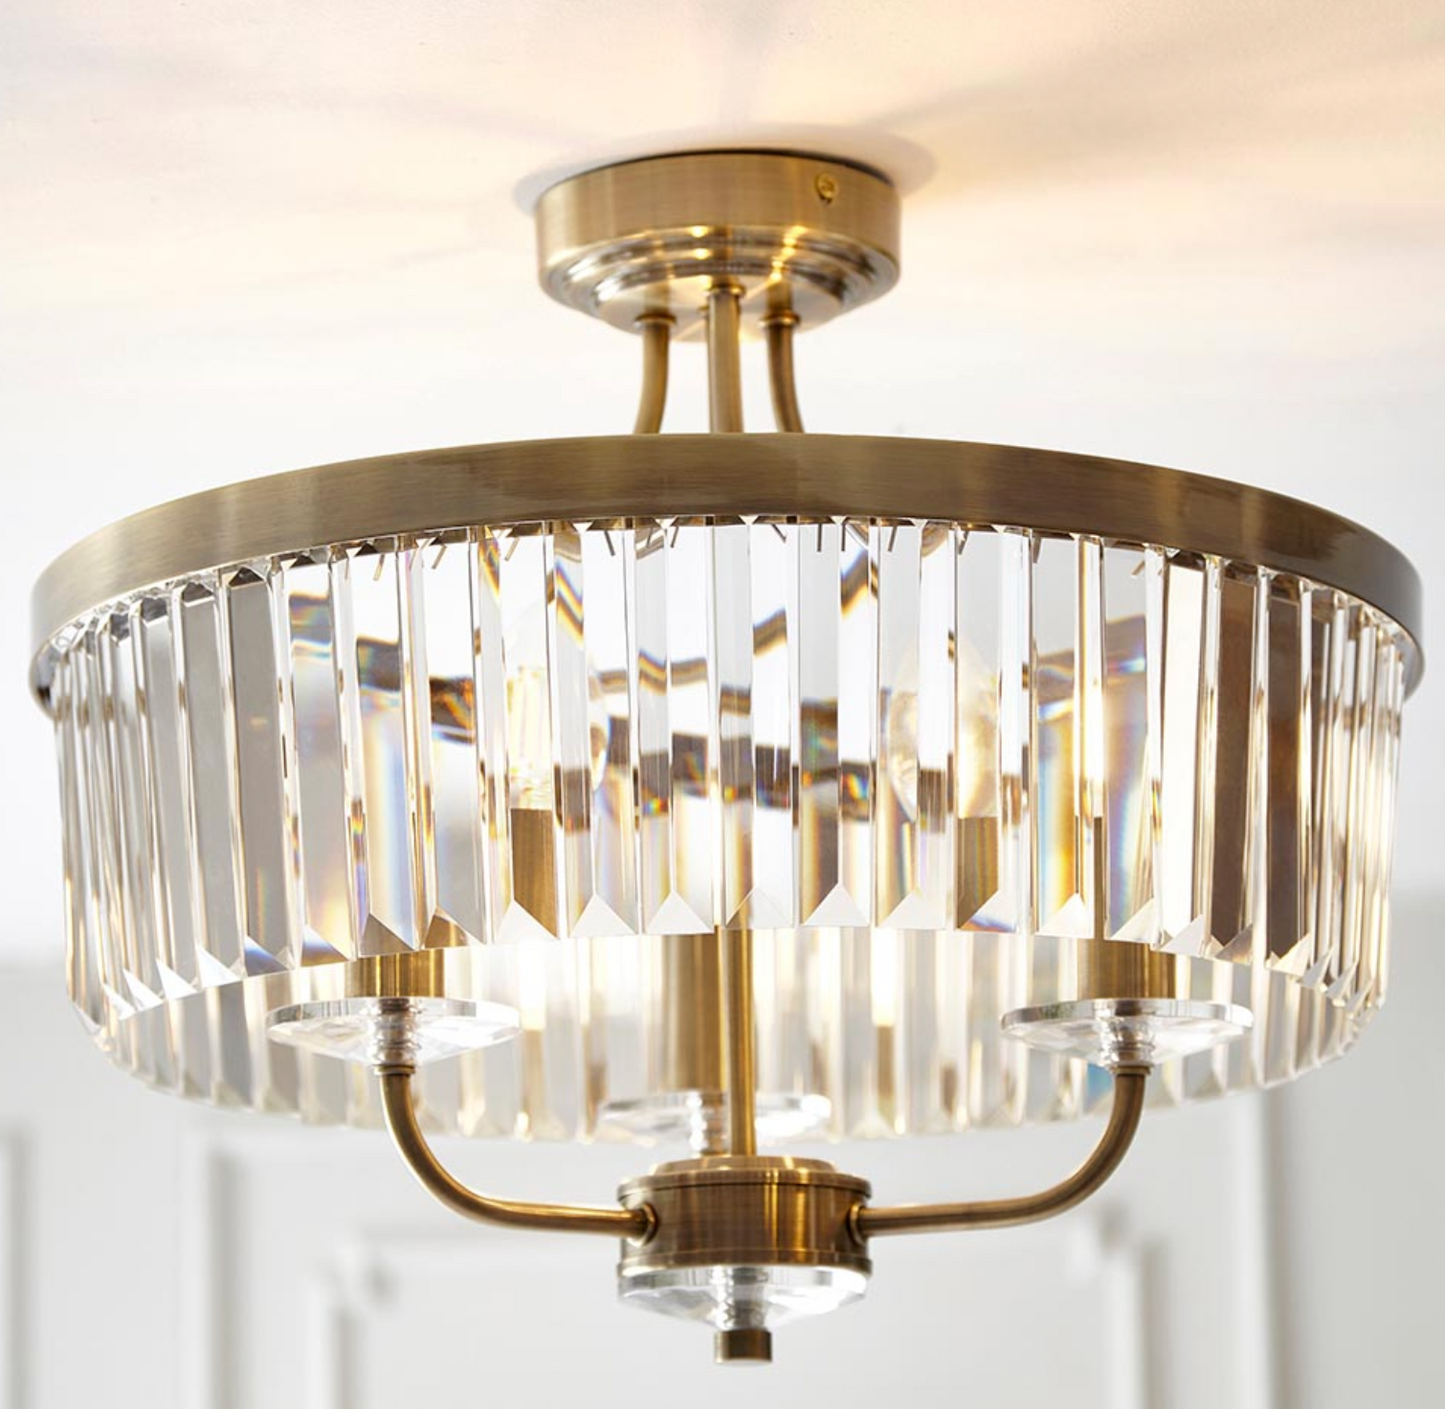 Round Antique Semi-Flush Chandelier, Brass And Clear Cut Glass - ID 12519